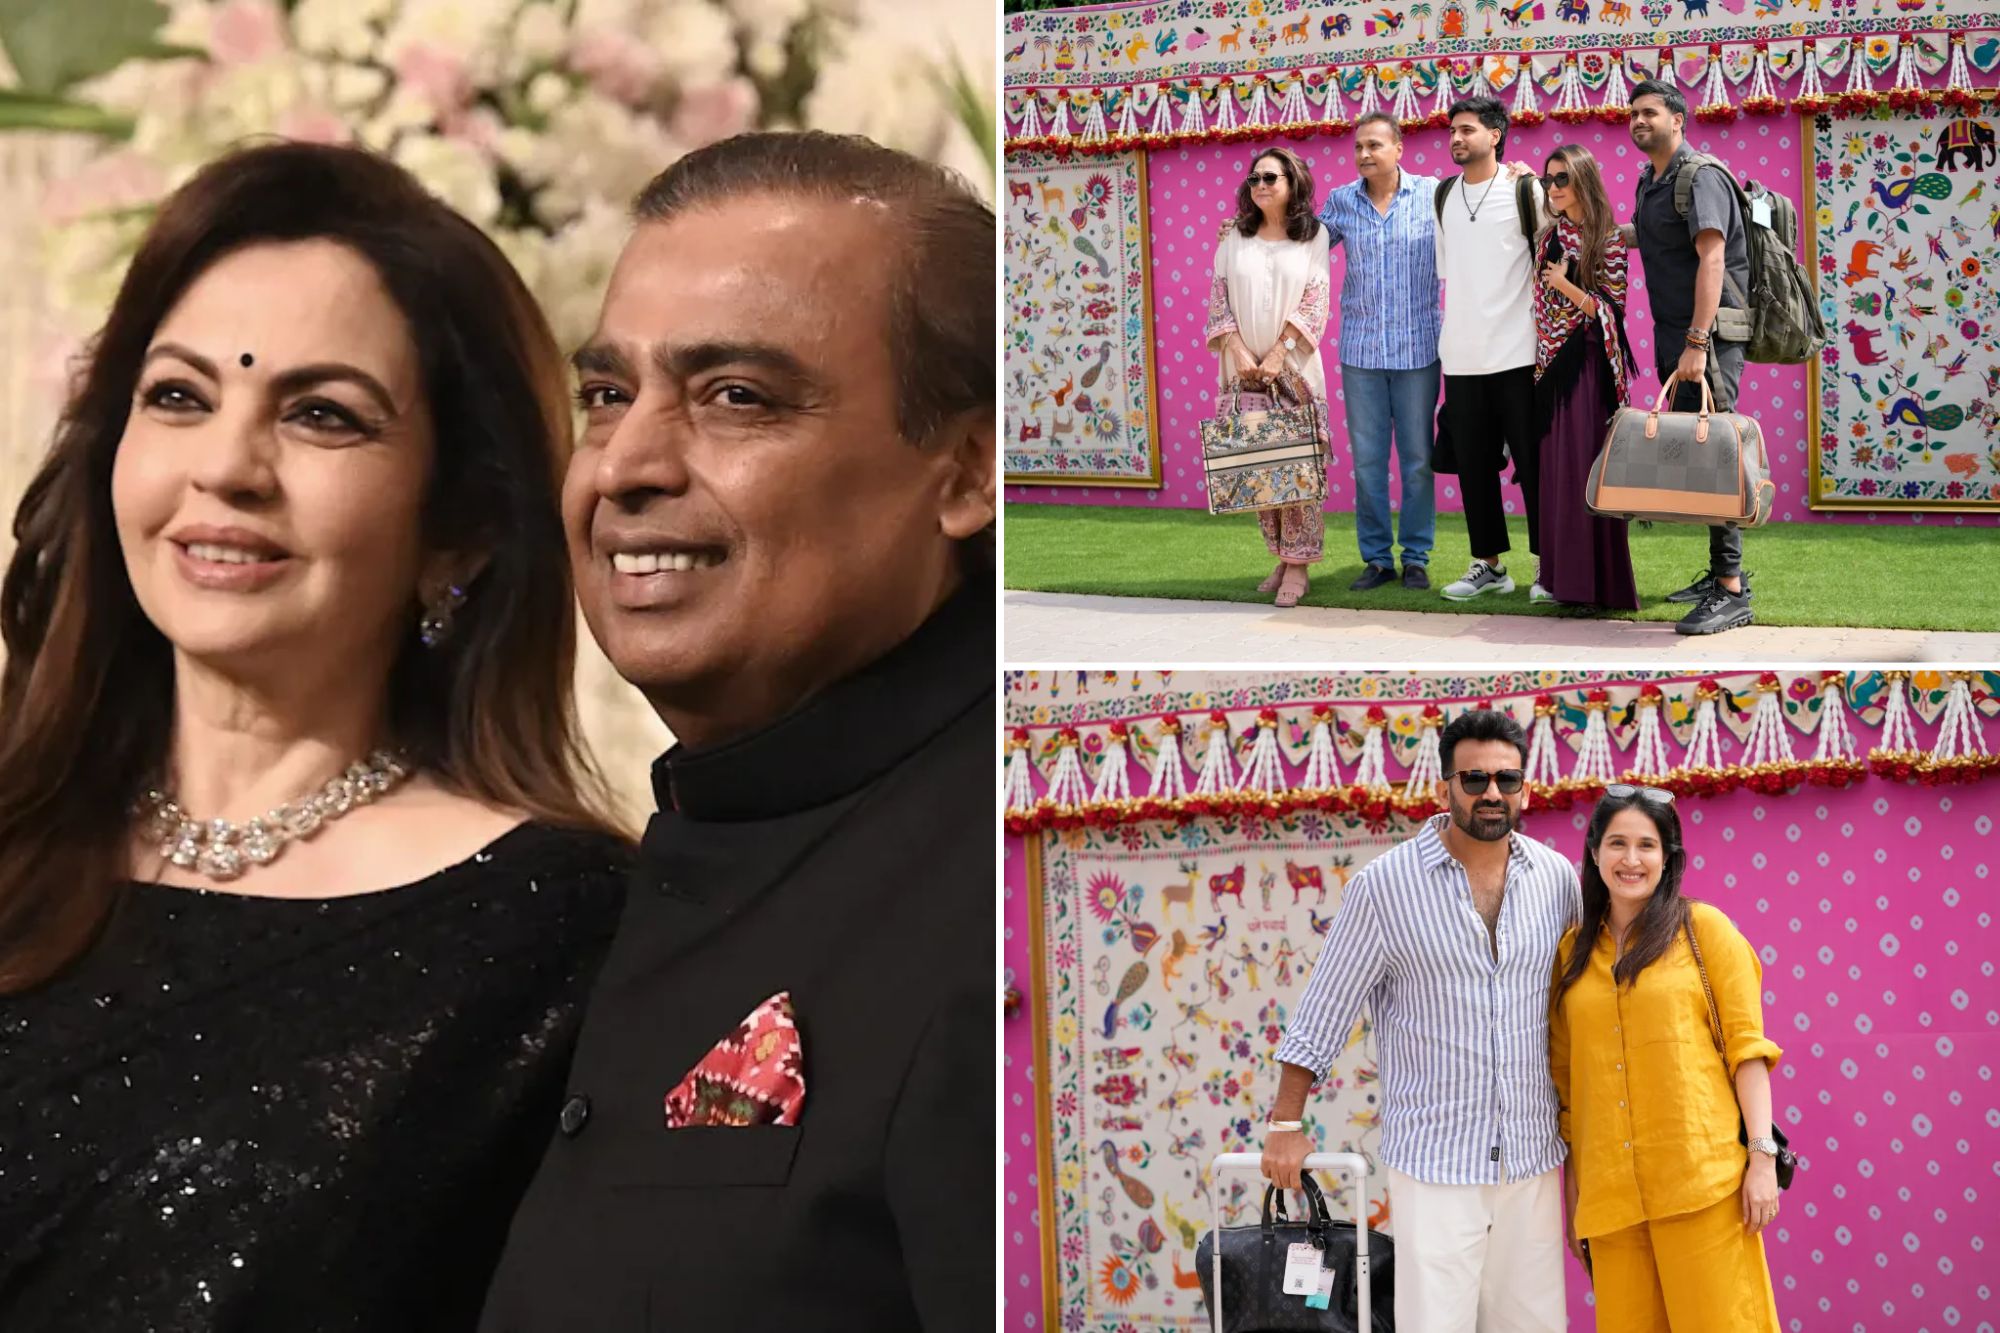 As billionaire industrialist?Mukesh Ambani?prepares for the wedding of his son, he’s expecting billionaires from around the world, heads of state, and Hollywood and Bollywood royalty to attend.